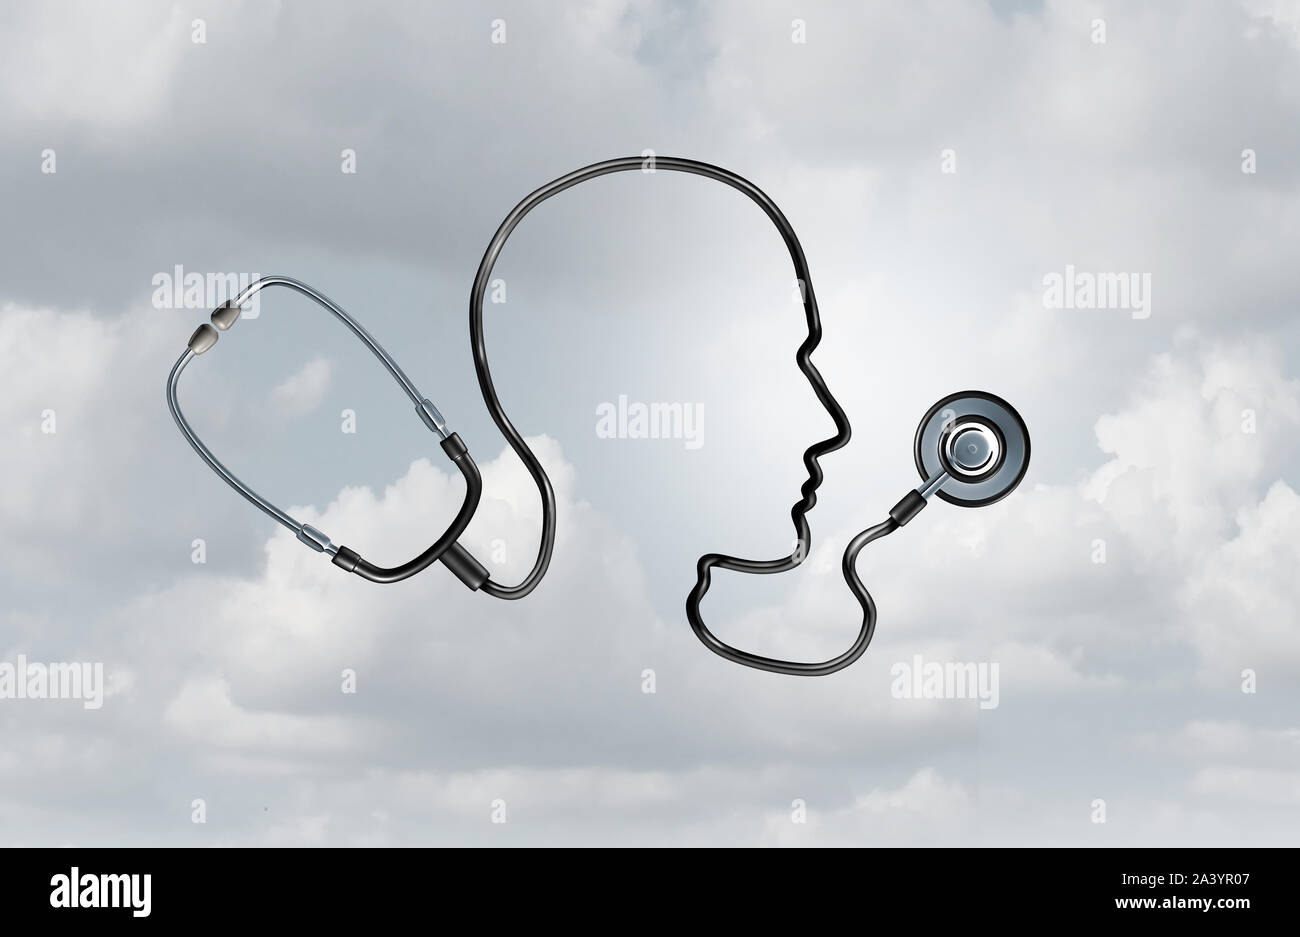 Mental health awareness month healthcare or health care concept as a 3D illustration. Stock Photo